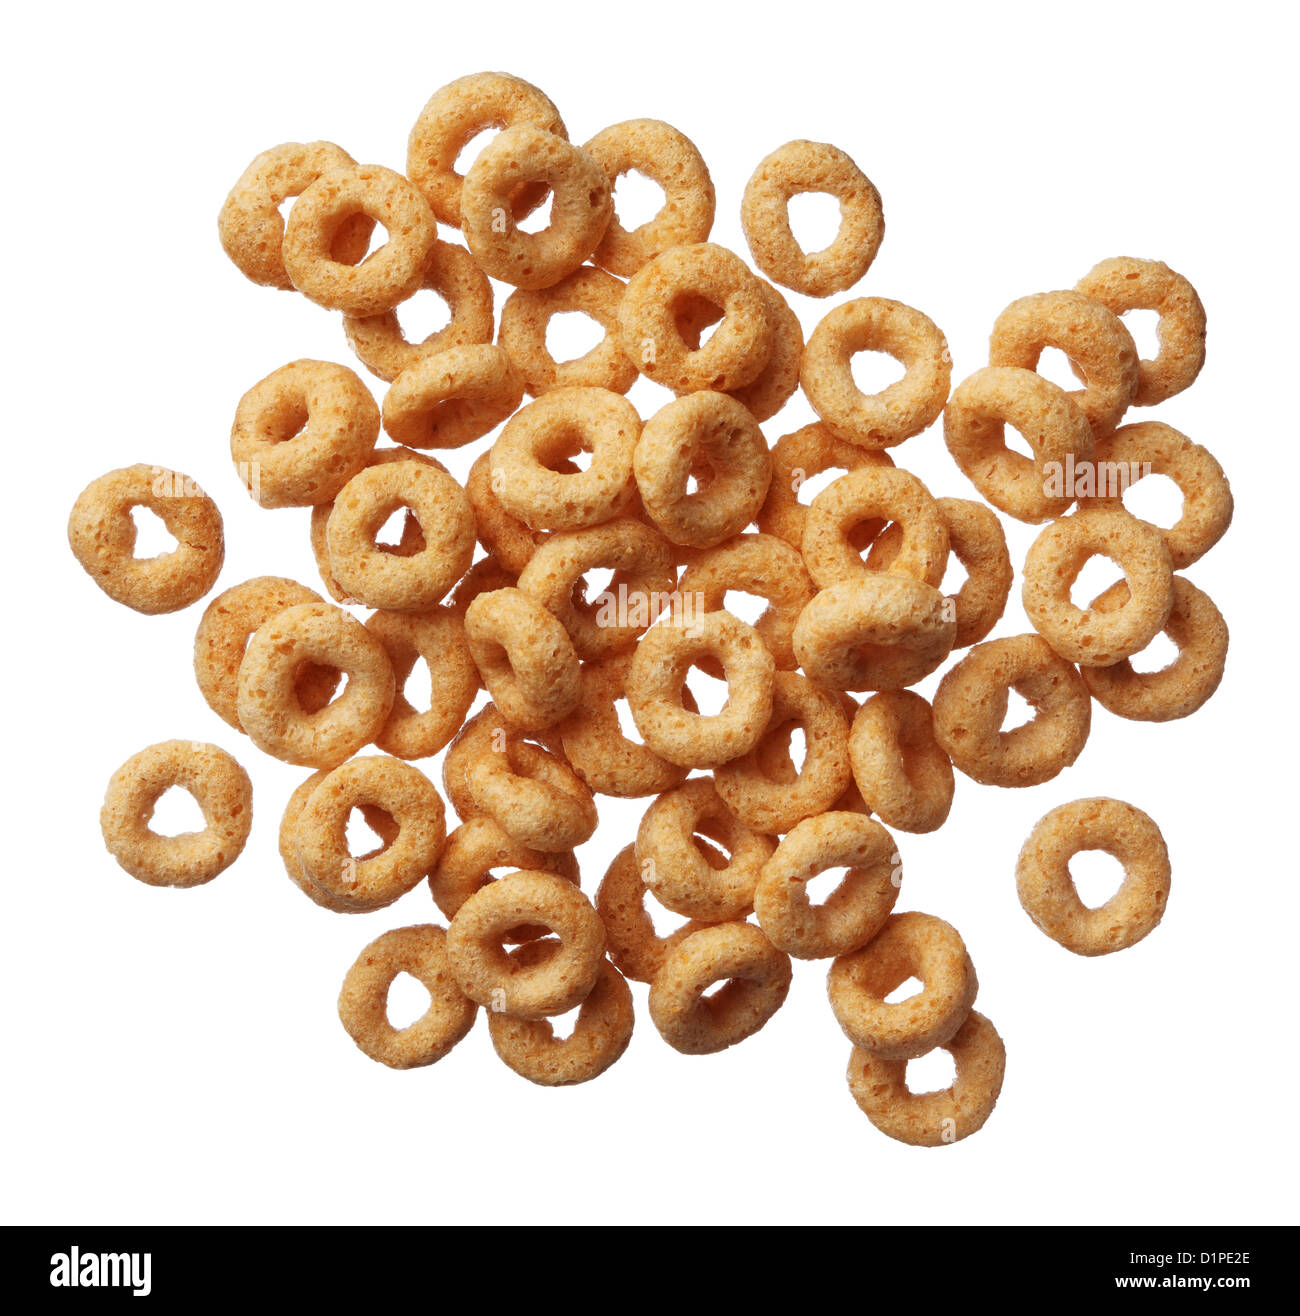 Cheerios cereal isolated on white background Stock Photo